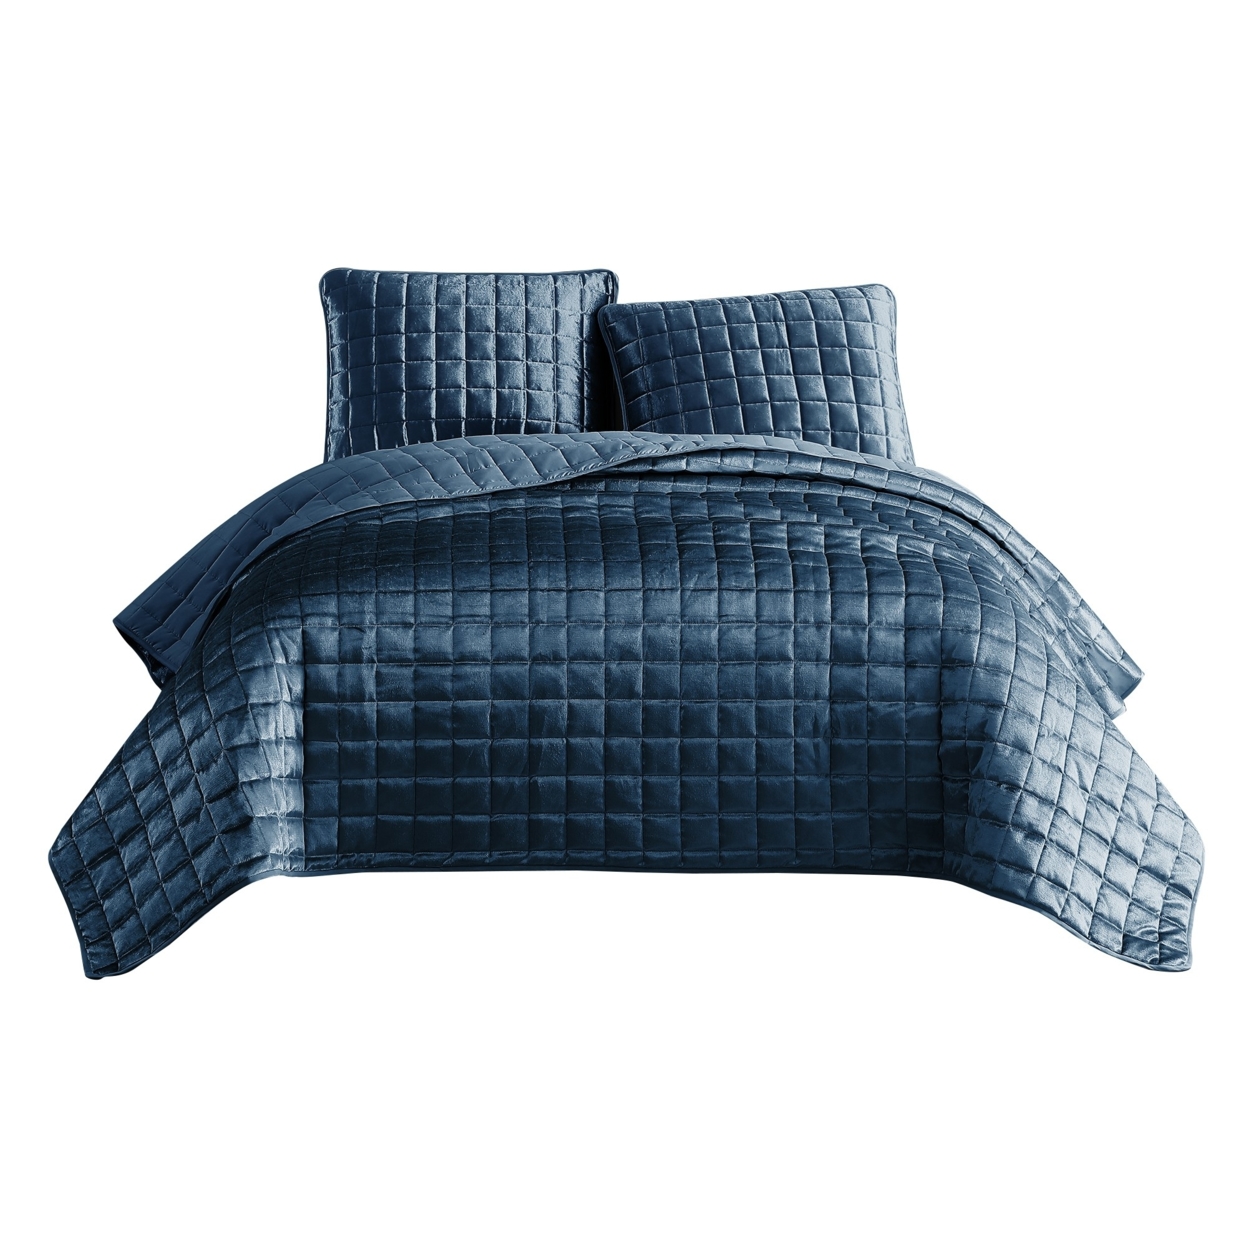 3 Piece King Coverlet Set With Stitched Square Pattern, Blue- Saltoro Sherpi